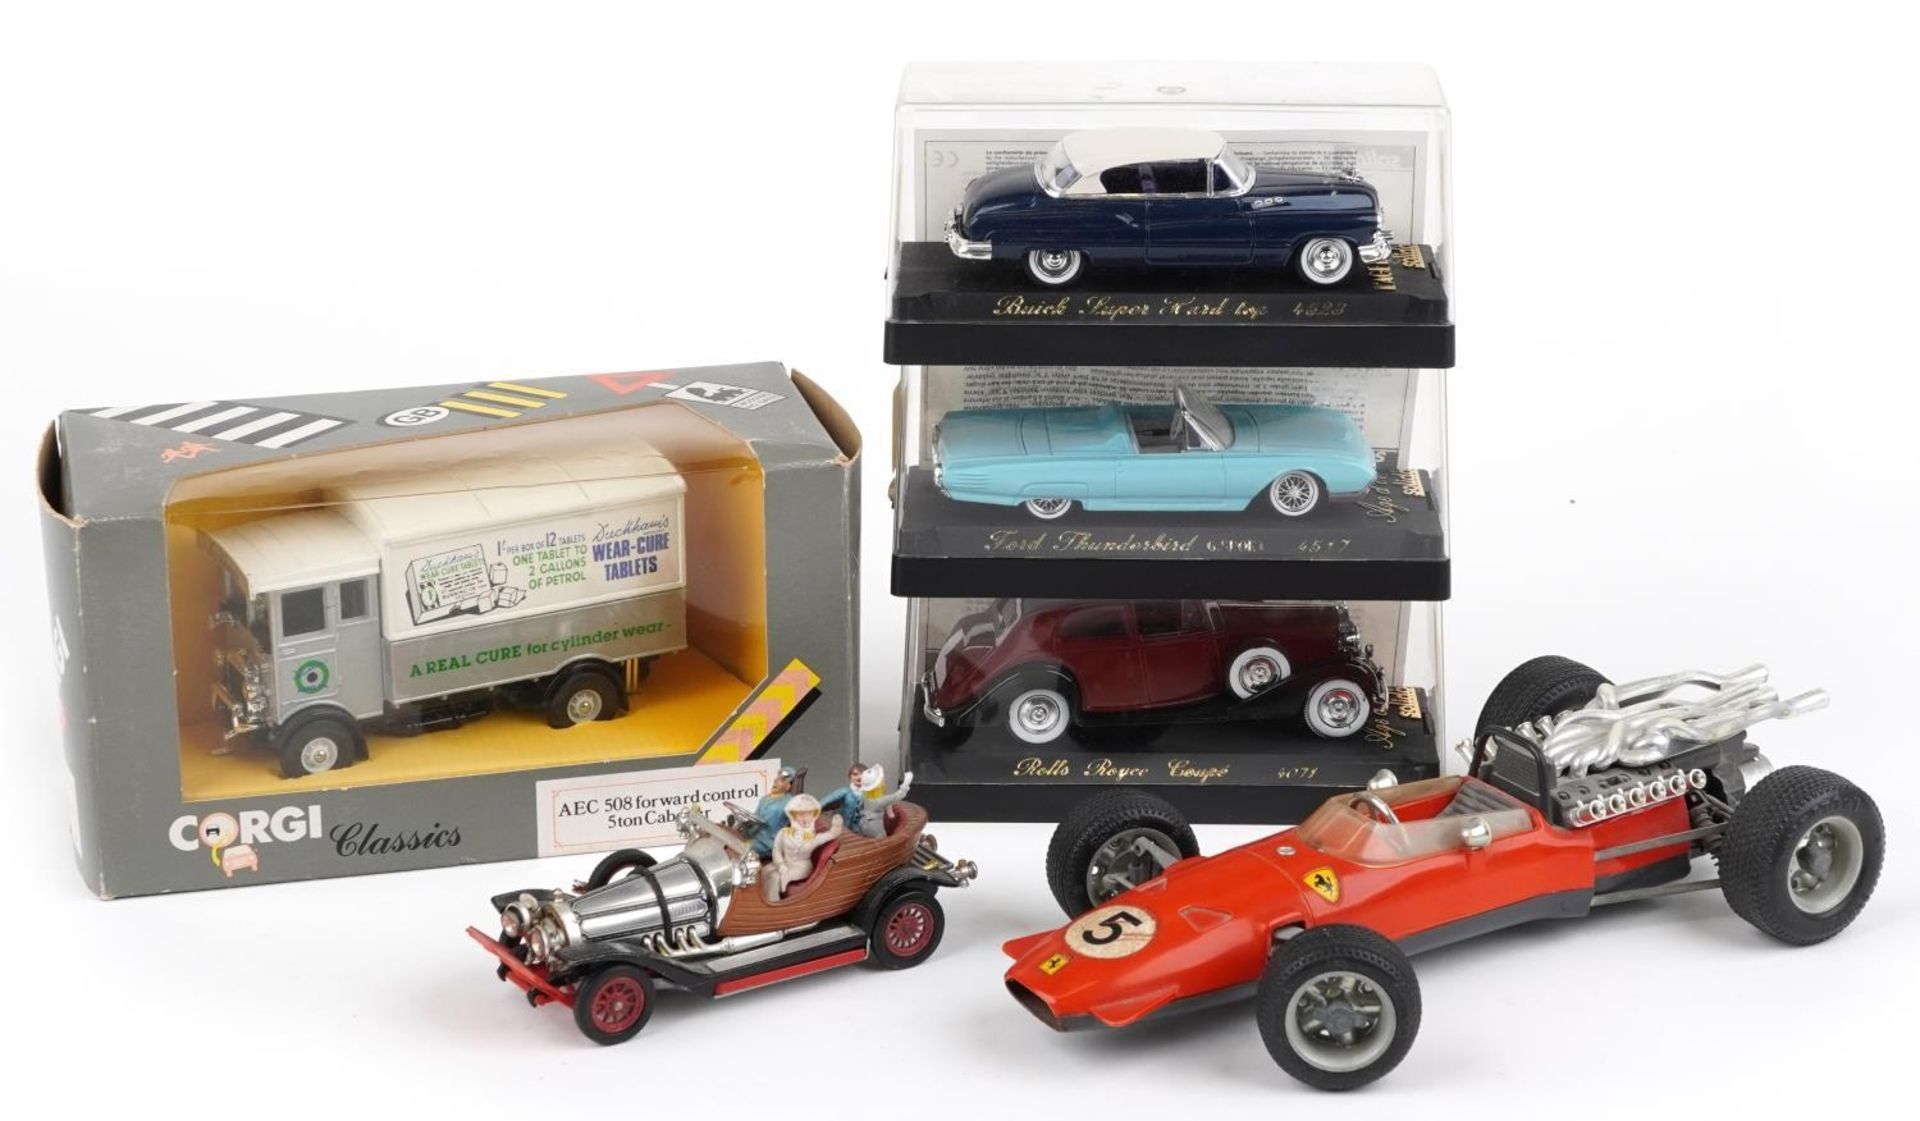 Vintage and later model and toy cars including Schuco Ferrari Formel II, Corgi Toys Chitty Chitty